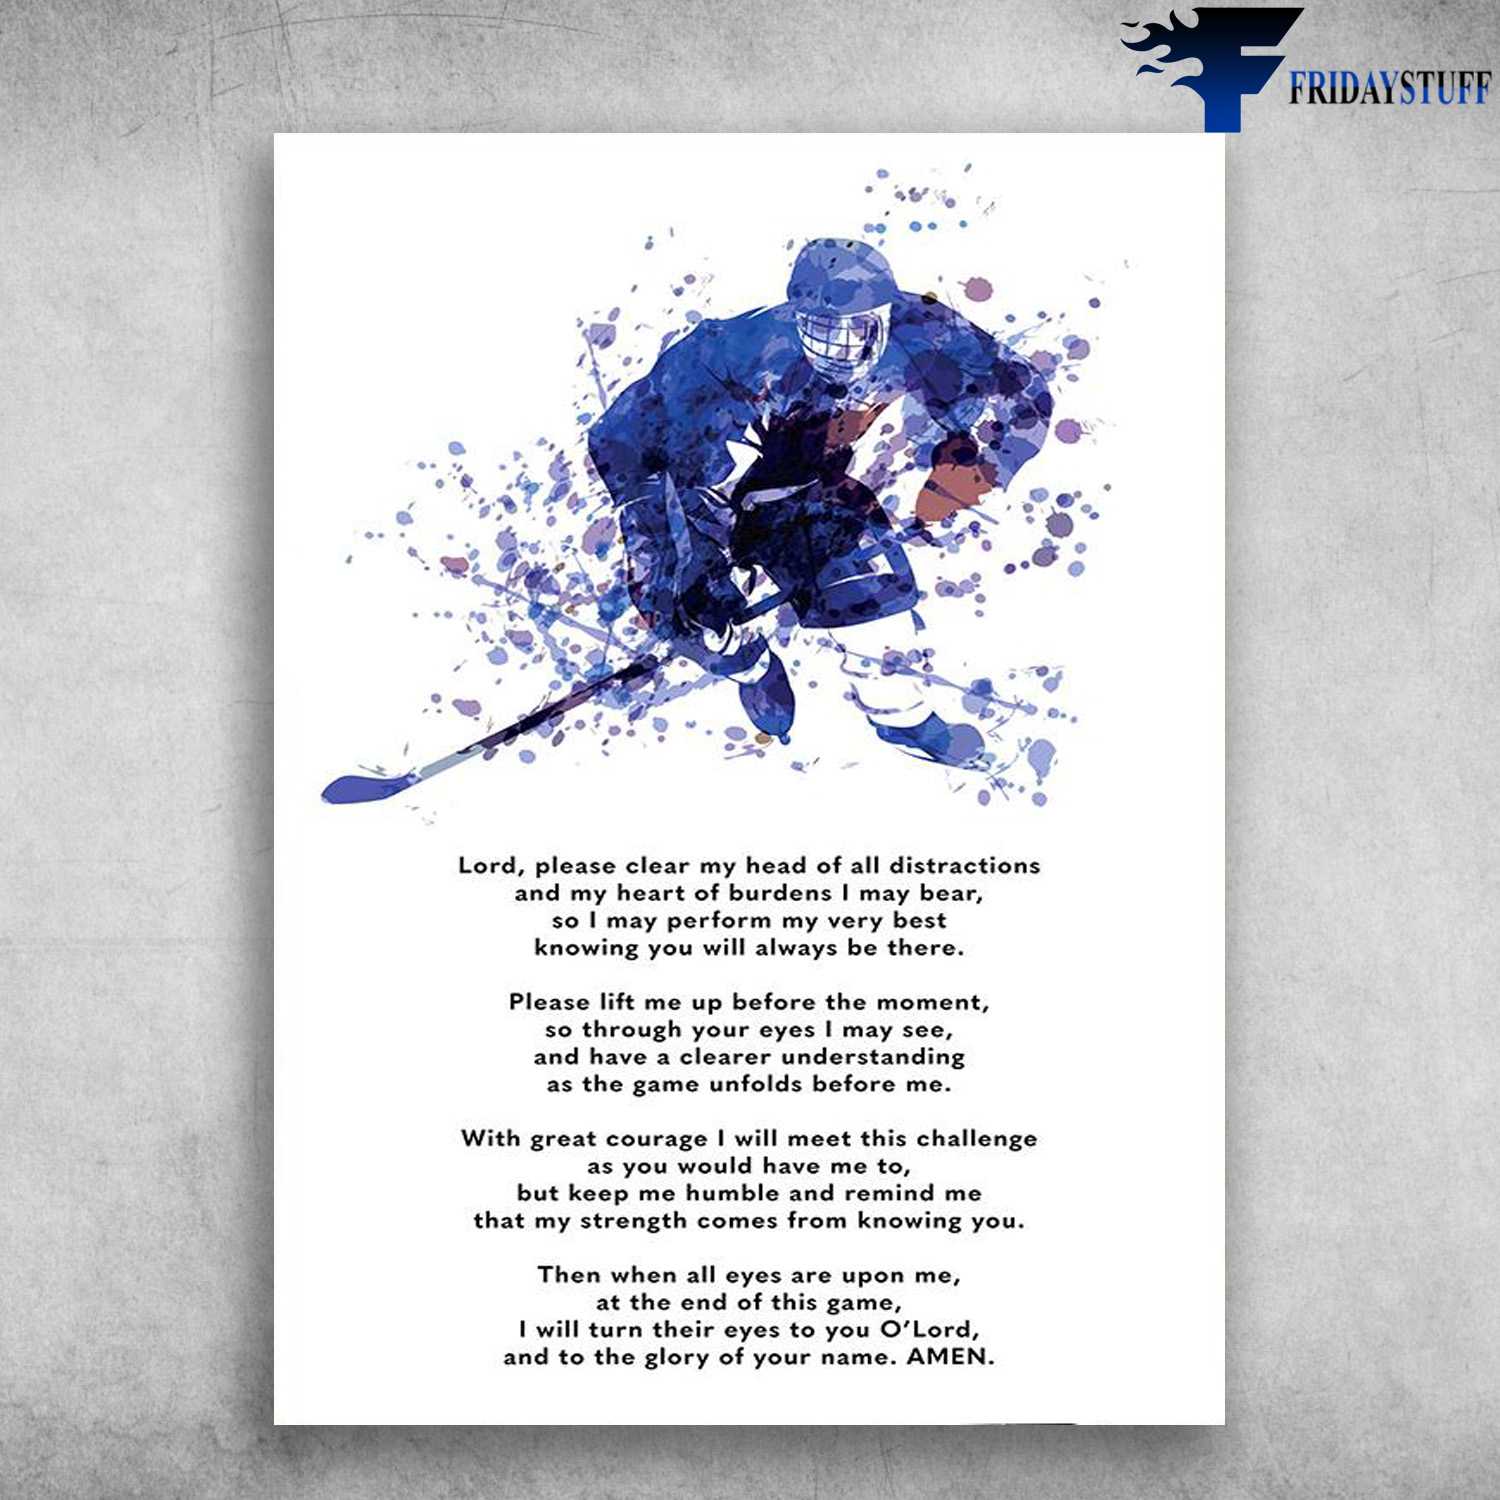 Hockey Poster - Lord, Pleasr Clear My Head Of All Distractions, And My Heart Of Burdens I May Bear, So I may Perform My Very Best, Knowing You Will Always Be There